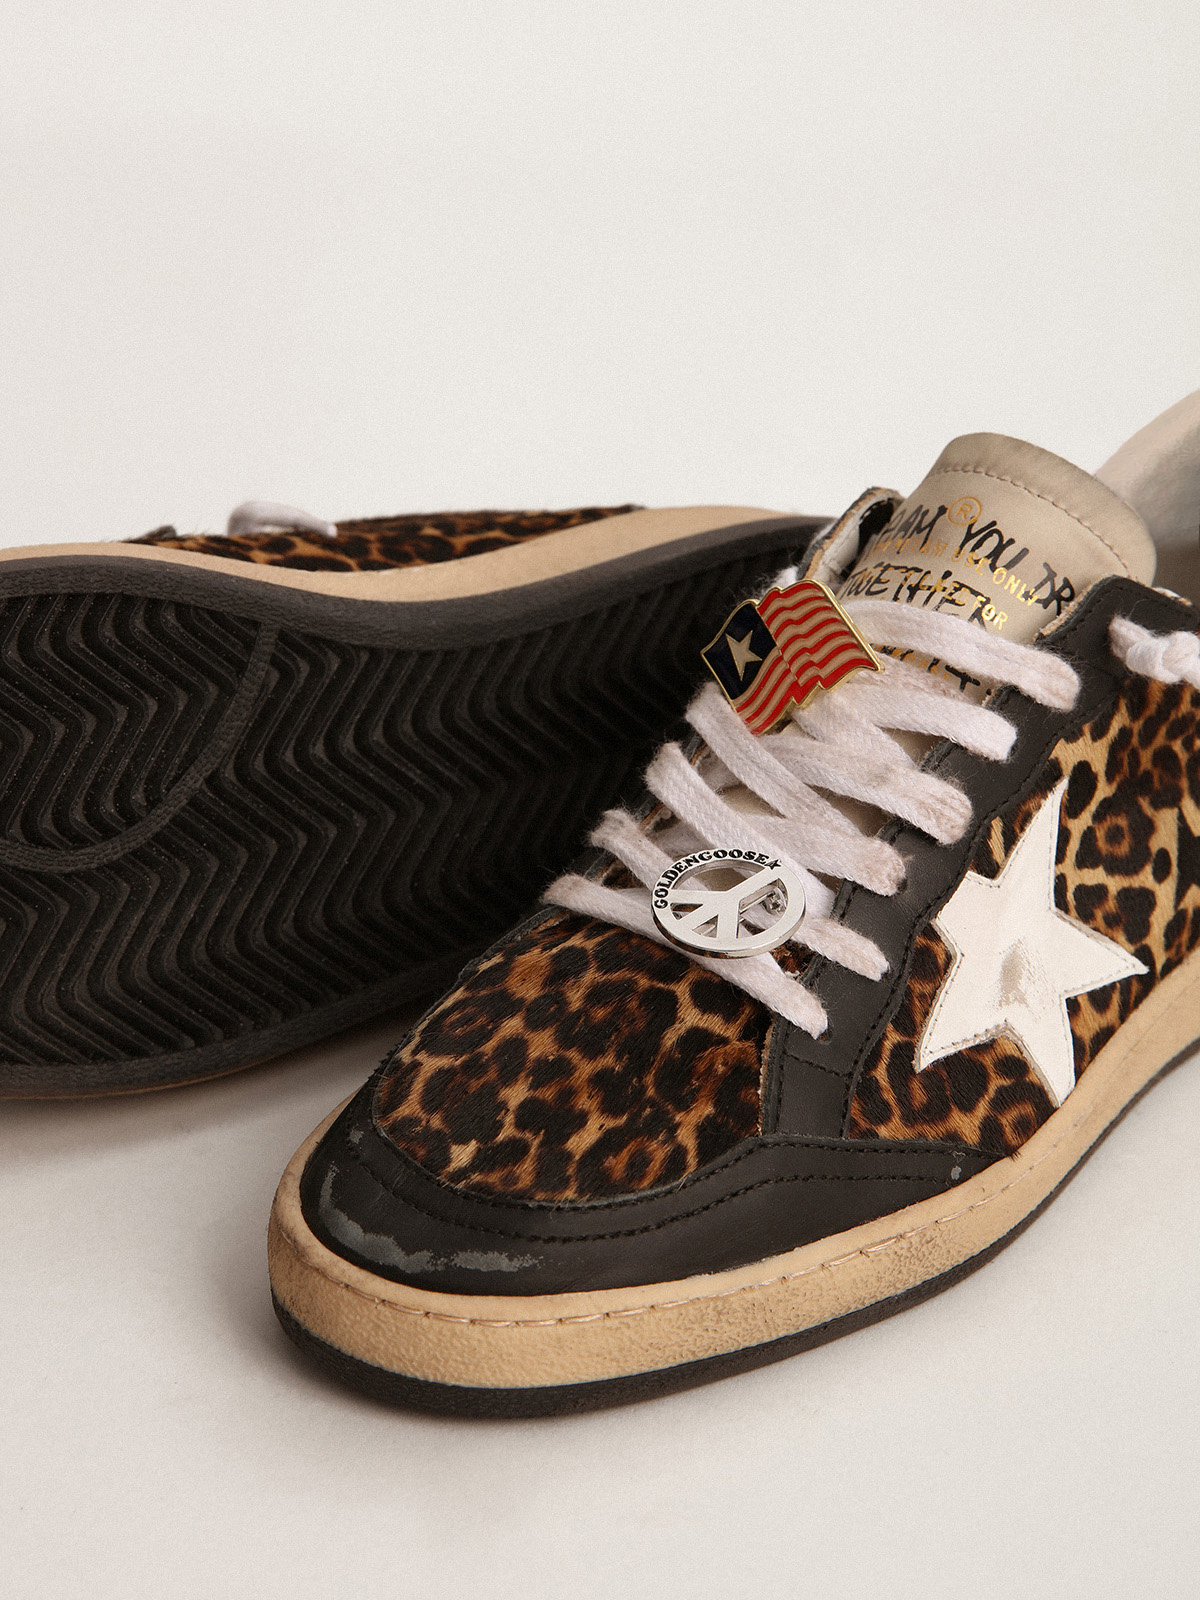 Ball Star sneakers in leopard-print pony skin with a white leather